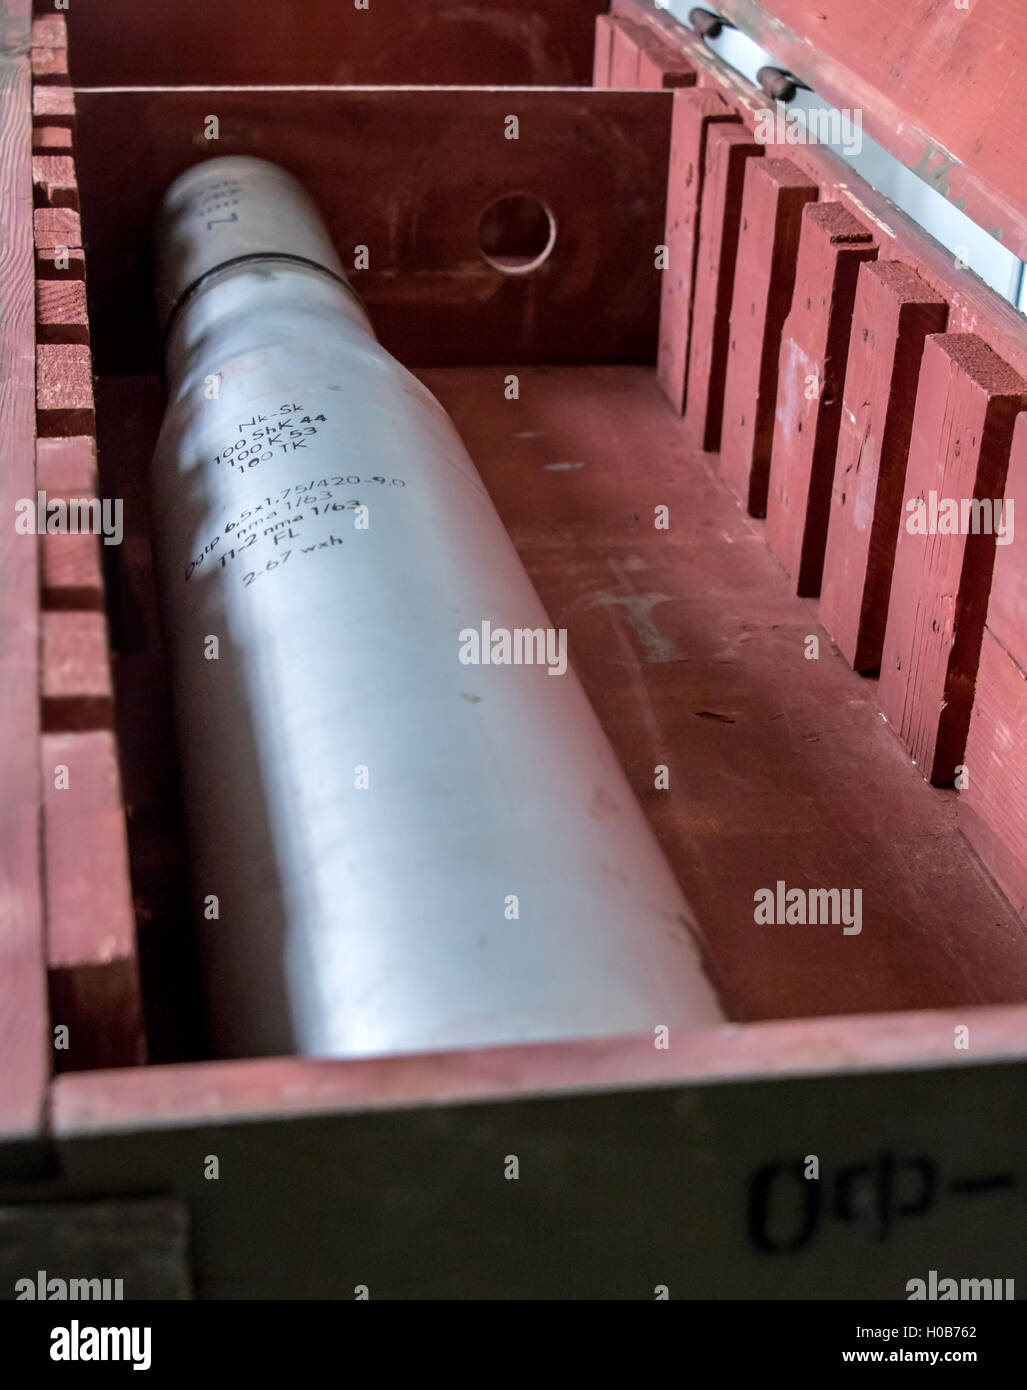 artillery charge caliber 100mm for tank T 54 inside wooden container Stock Photo